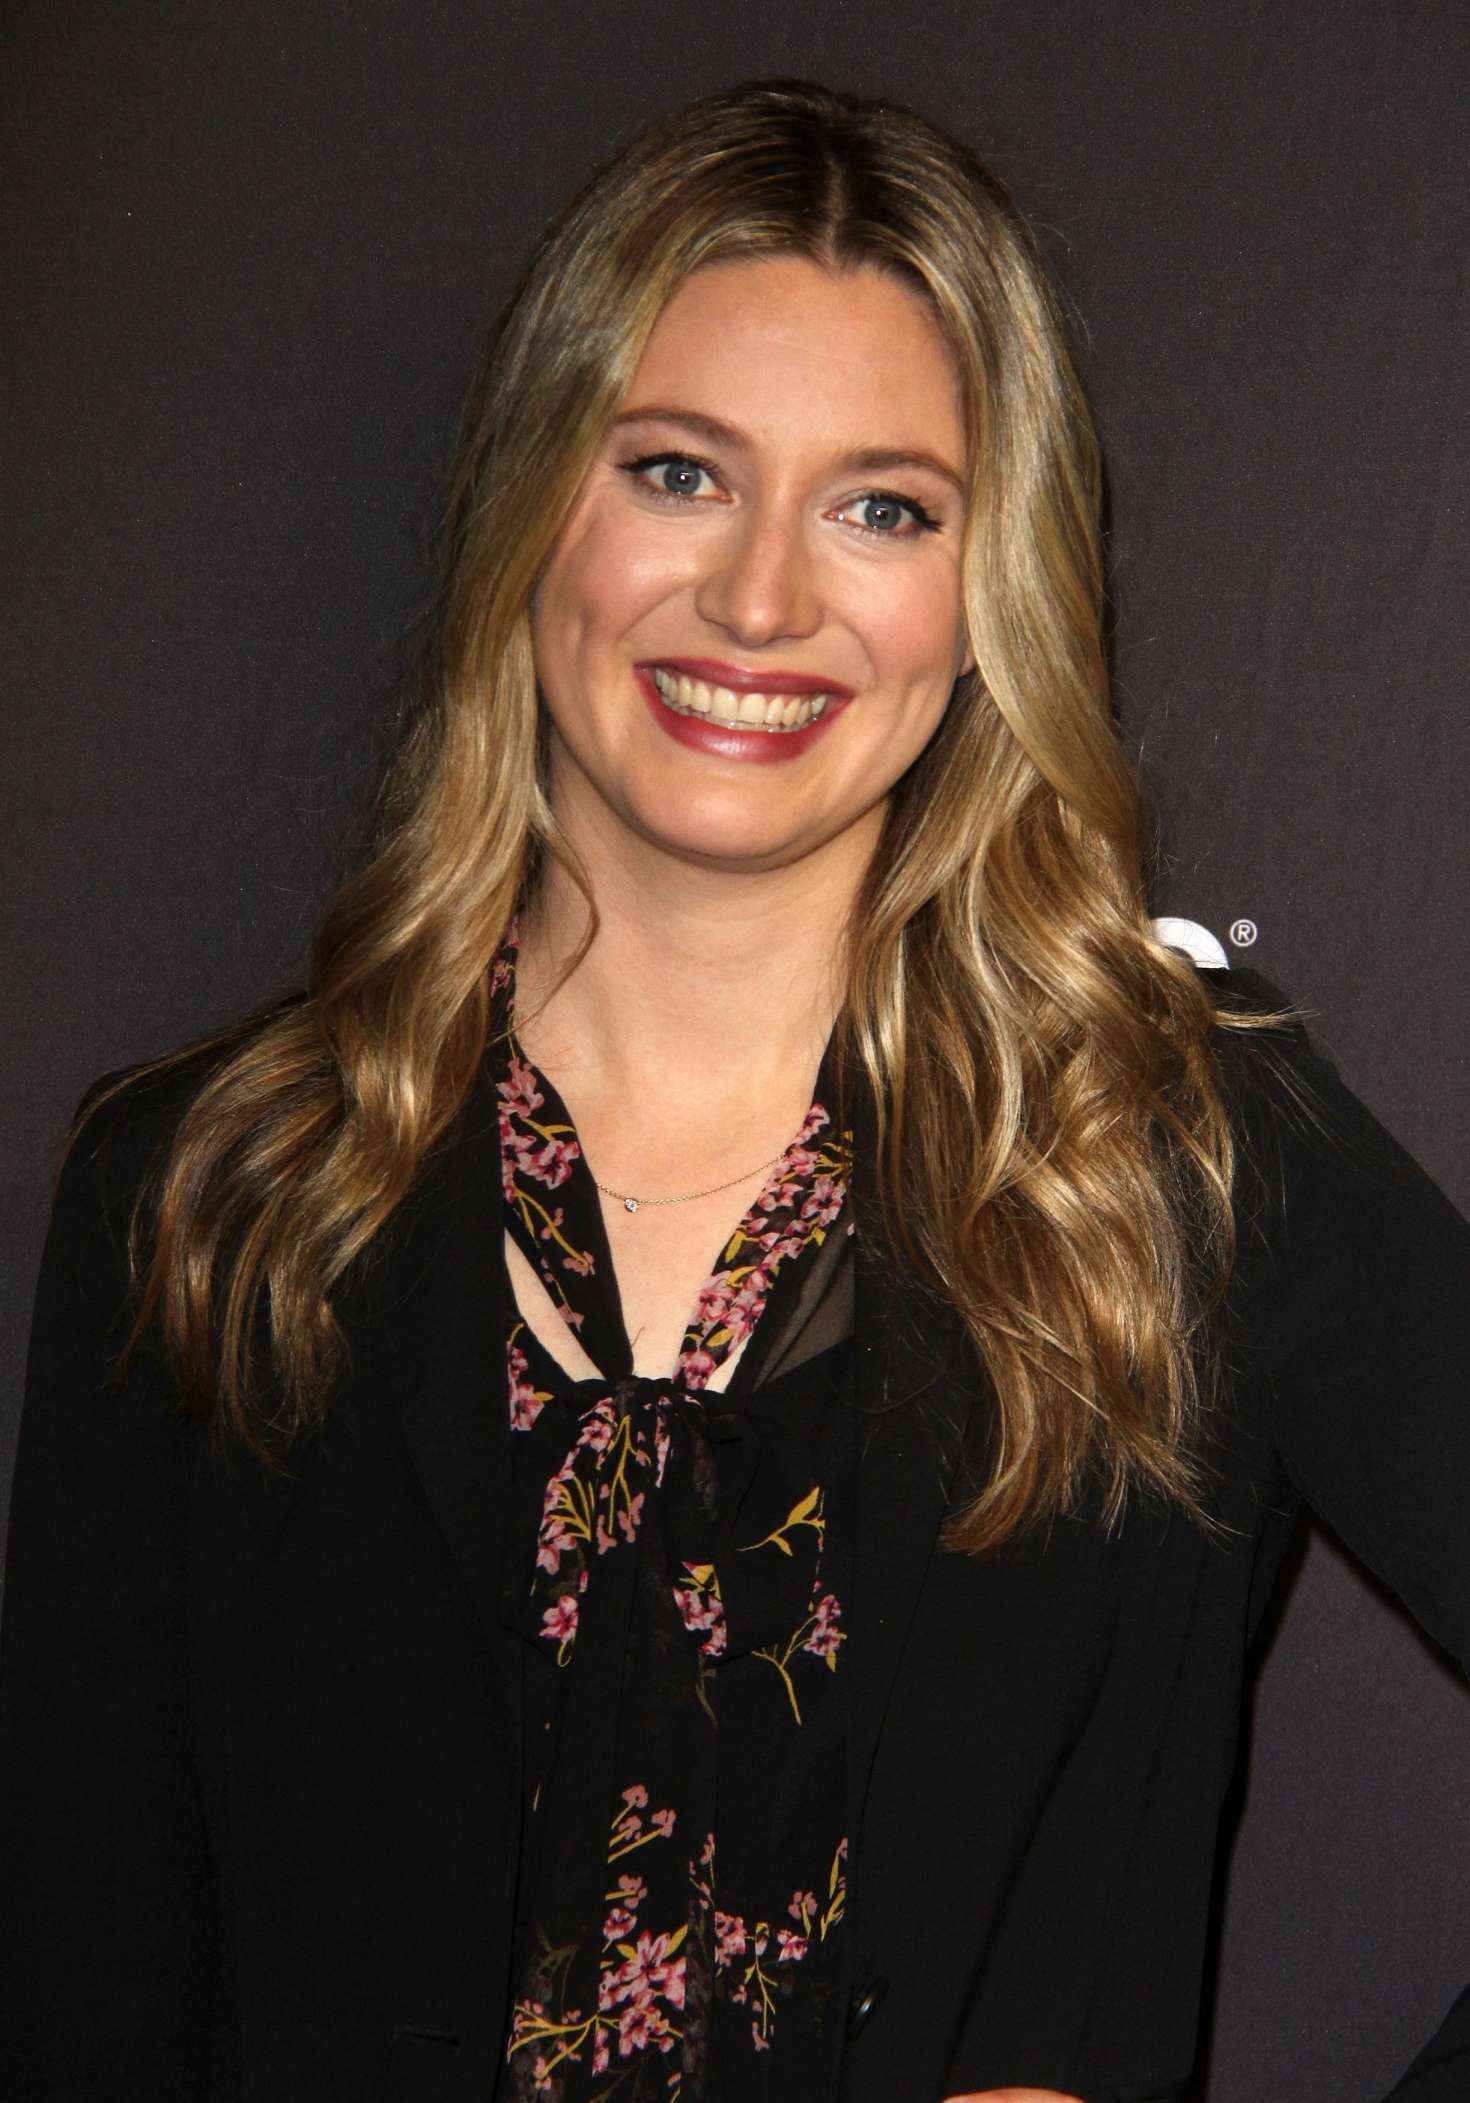 Zoe Perry 2018 : Zoe Perry: The Big Bang Theory Presentation at Paleyfest -...